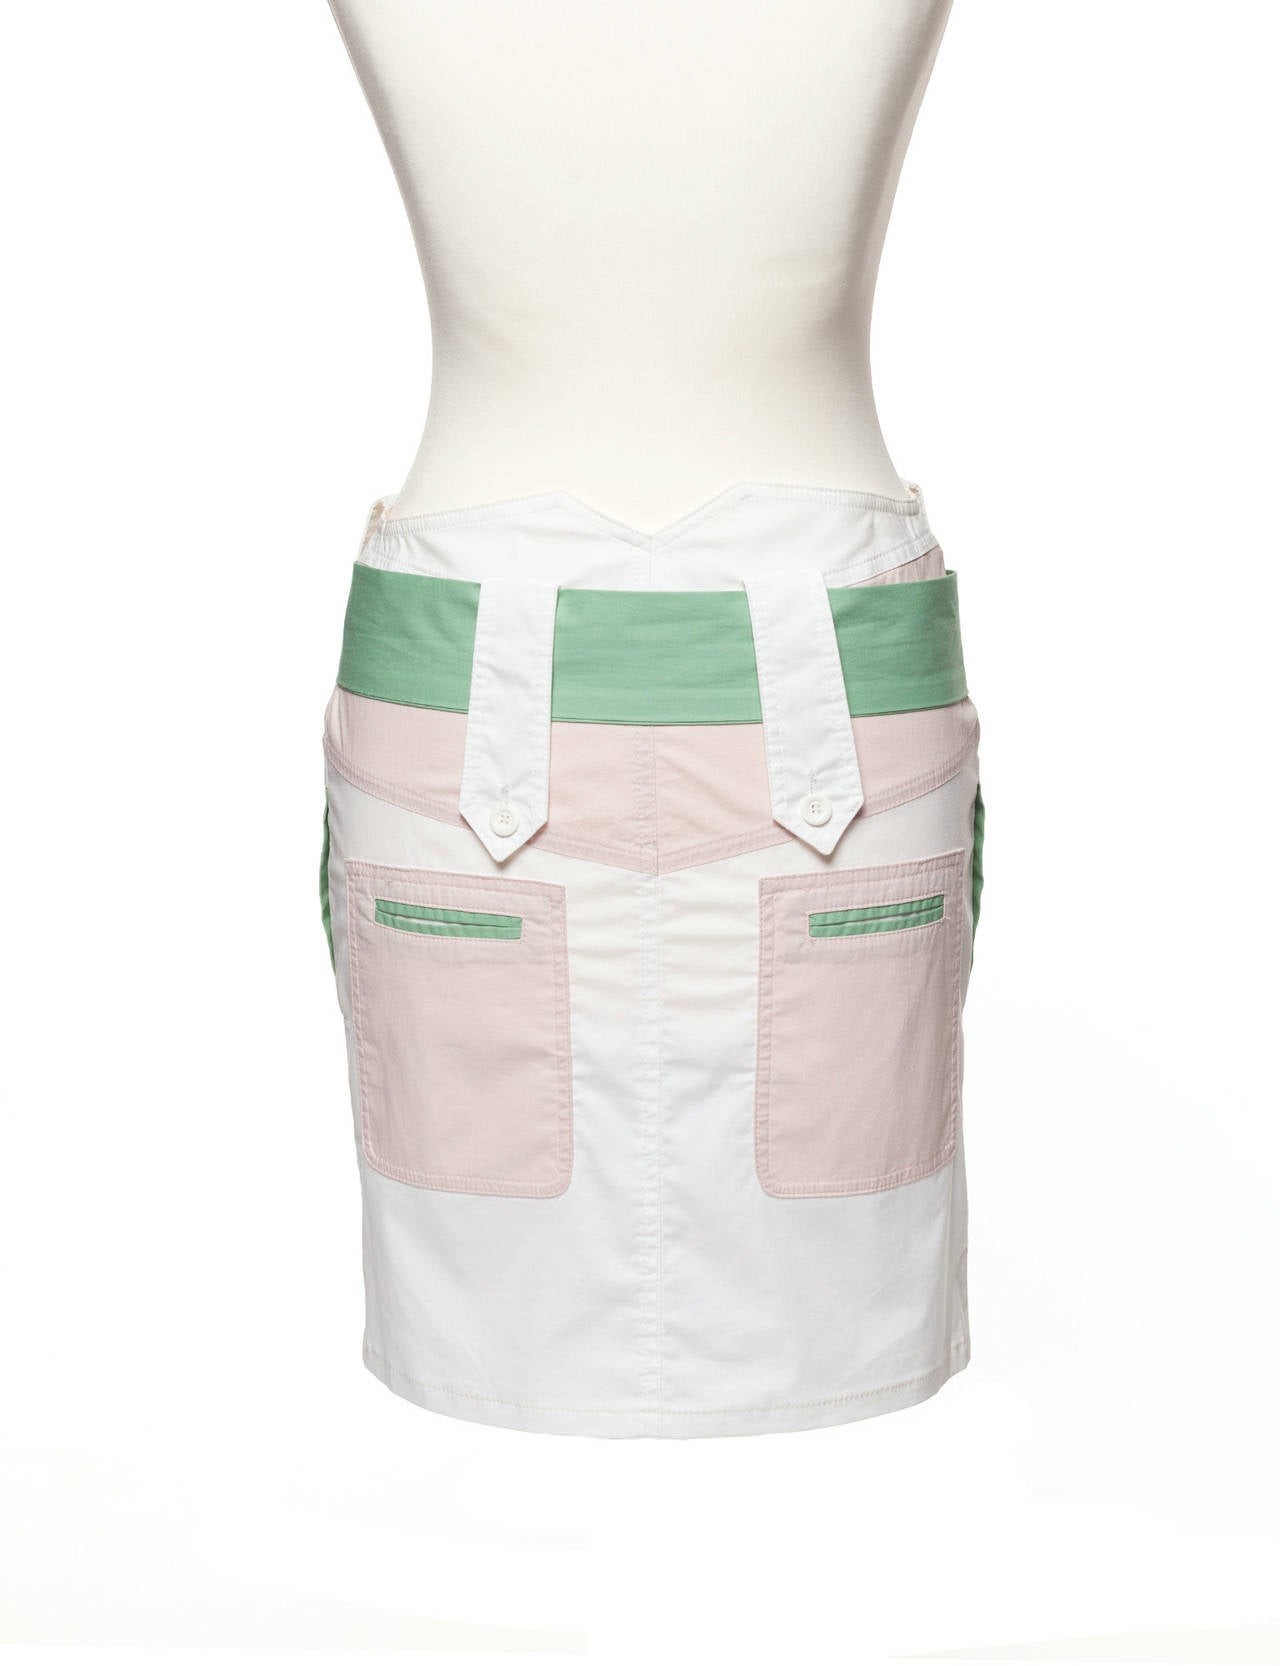 Women's Chloe by Phoebe Philo Spring 2004 color blocked skirt, Sz. 8 For Sale